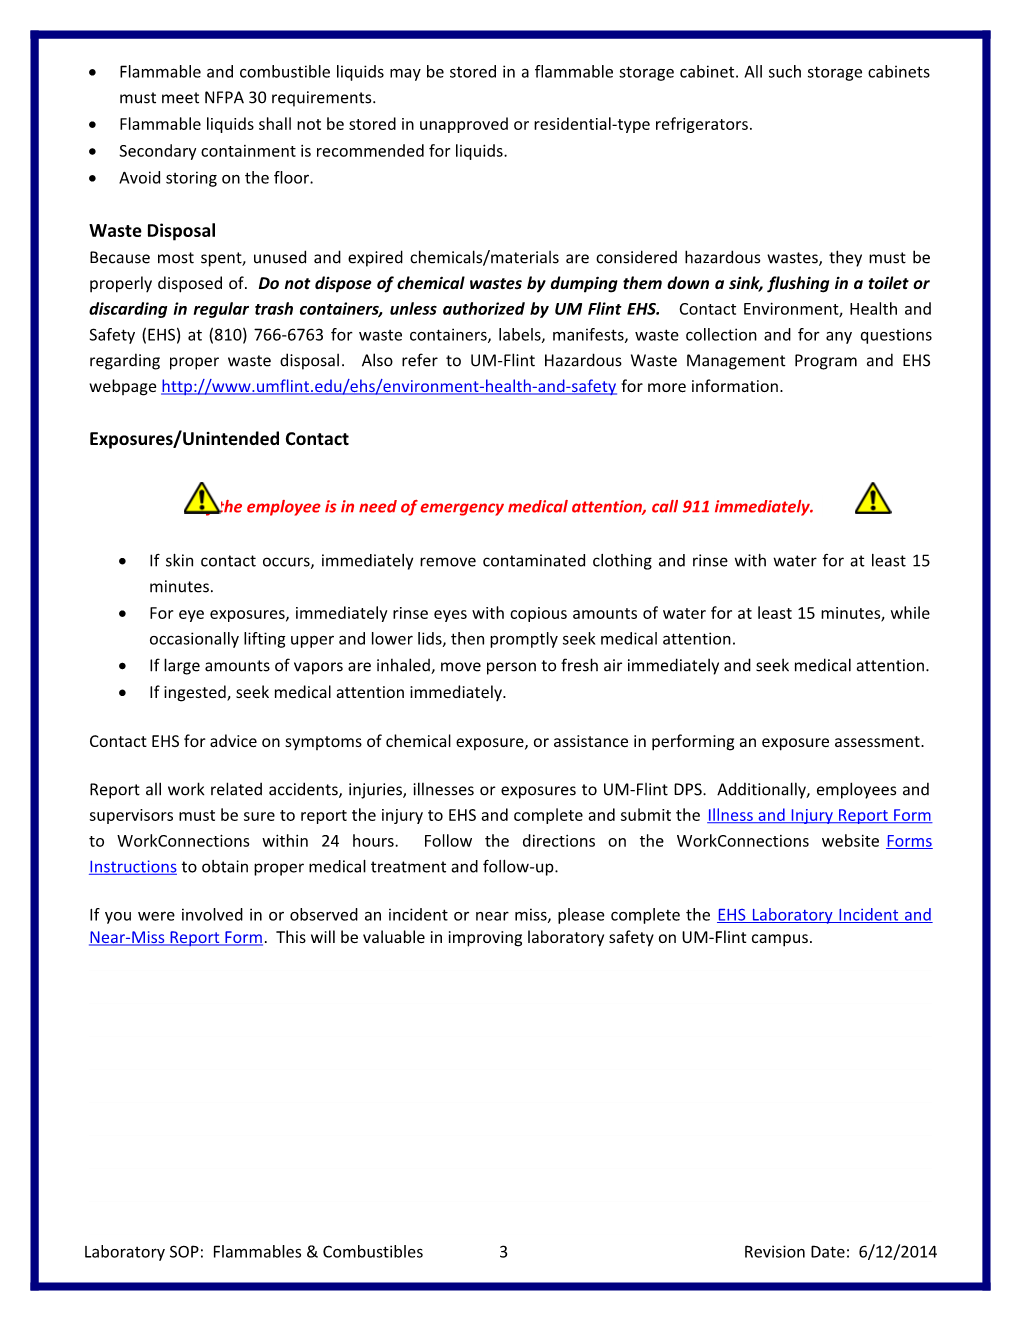 Laboratory SOP: Flammables & Combustibles1revision Date: 6/12/2014